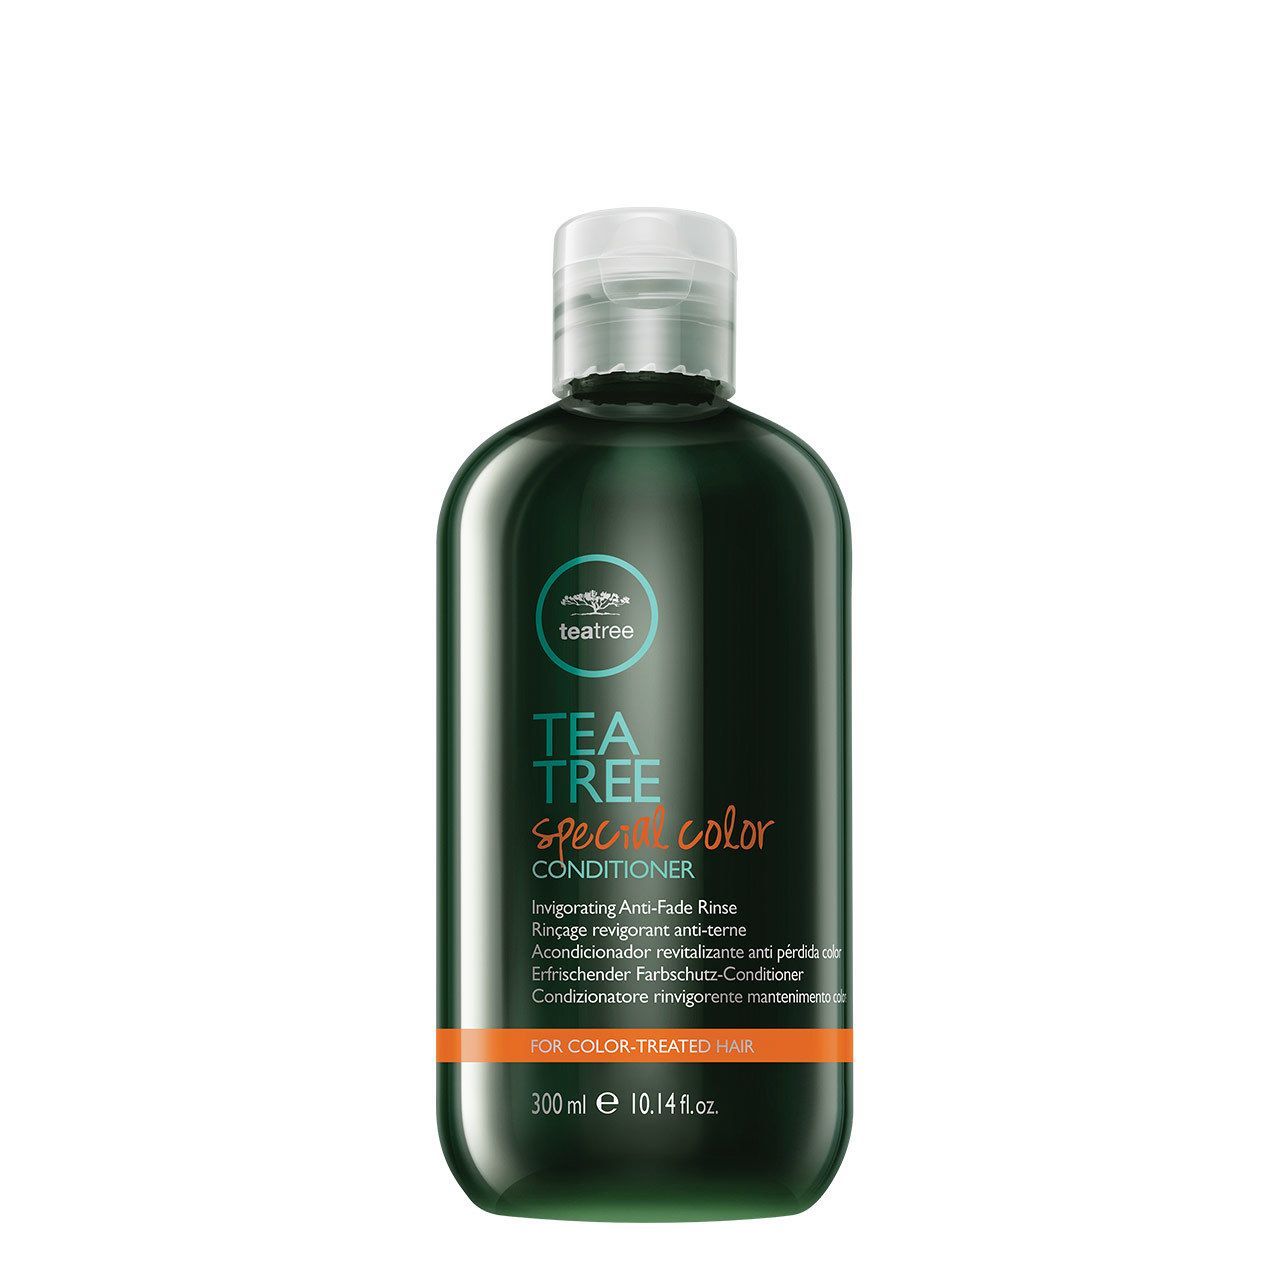 Paul Mitchell Tea Tree Special Colour Conditioner - 300ml